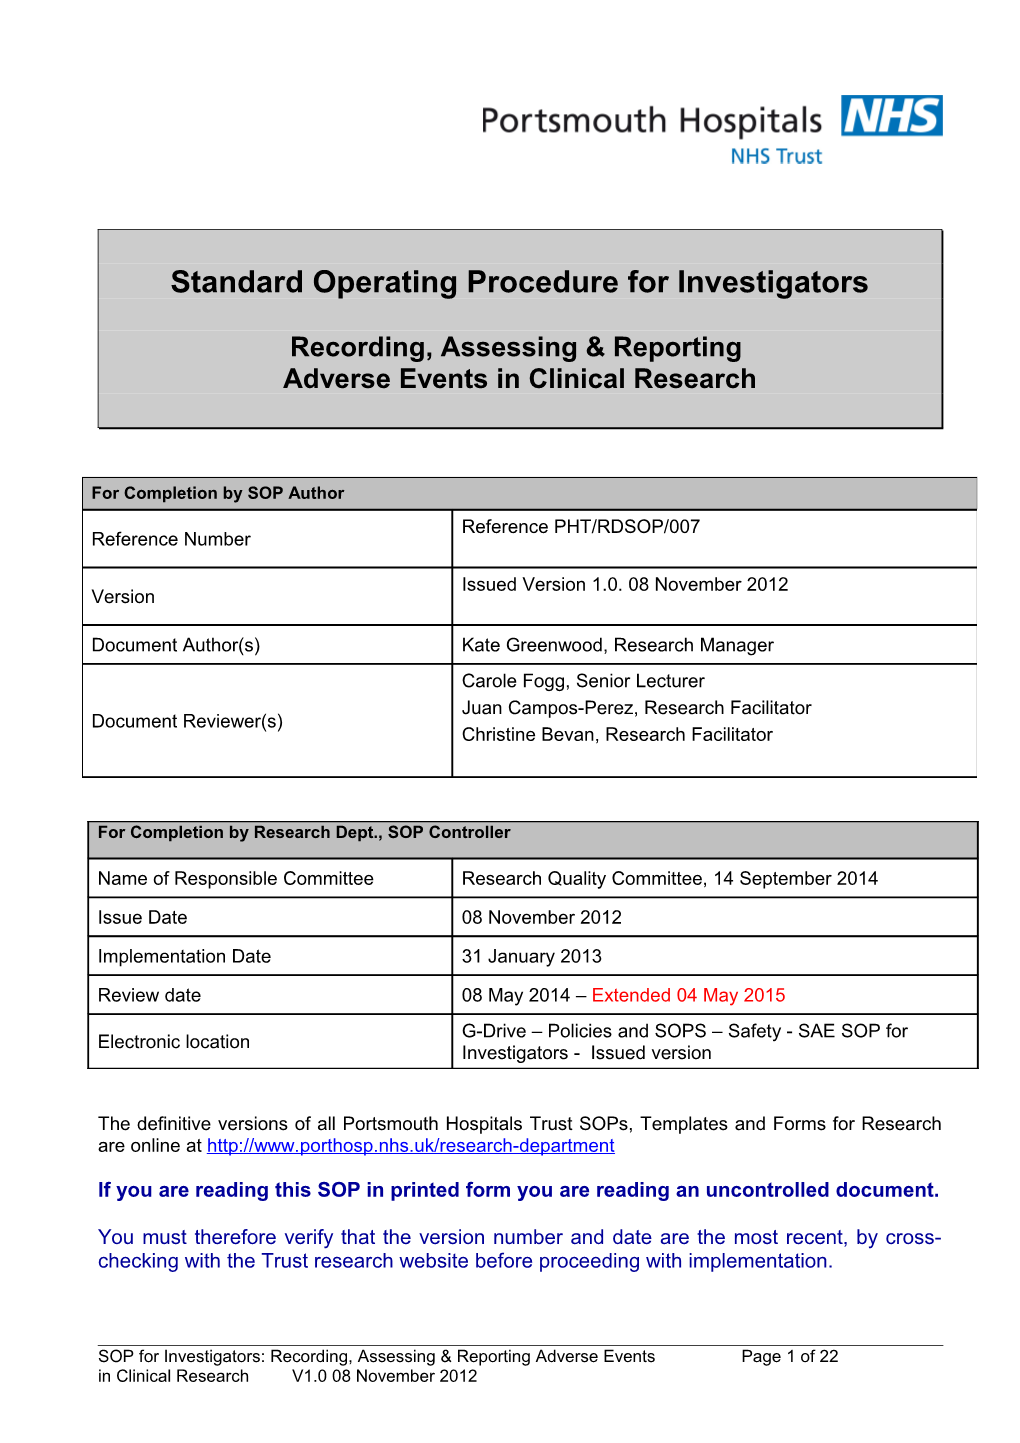 Portsmouth Hospitals Procedural Document Template s5